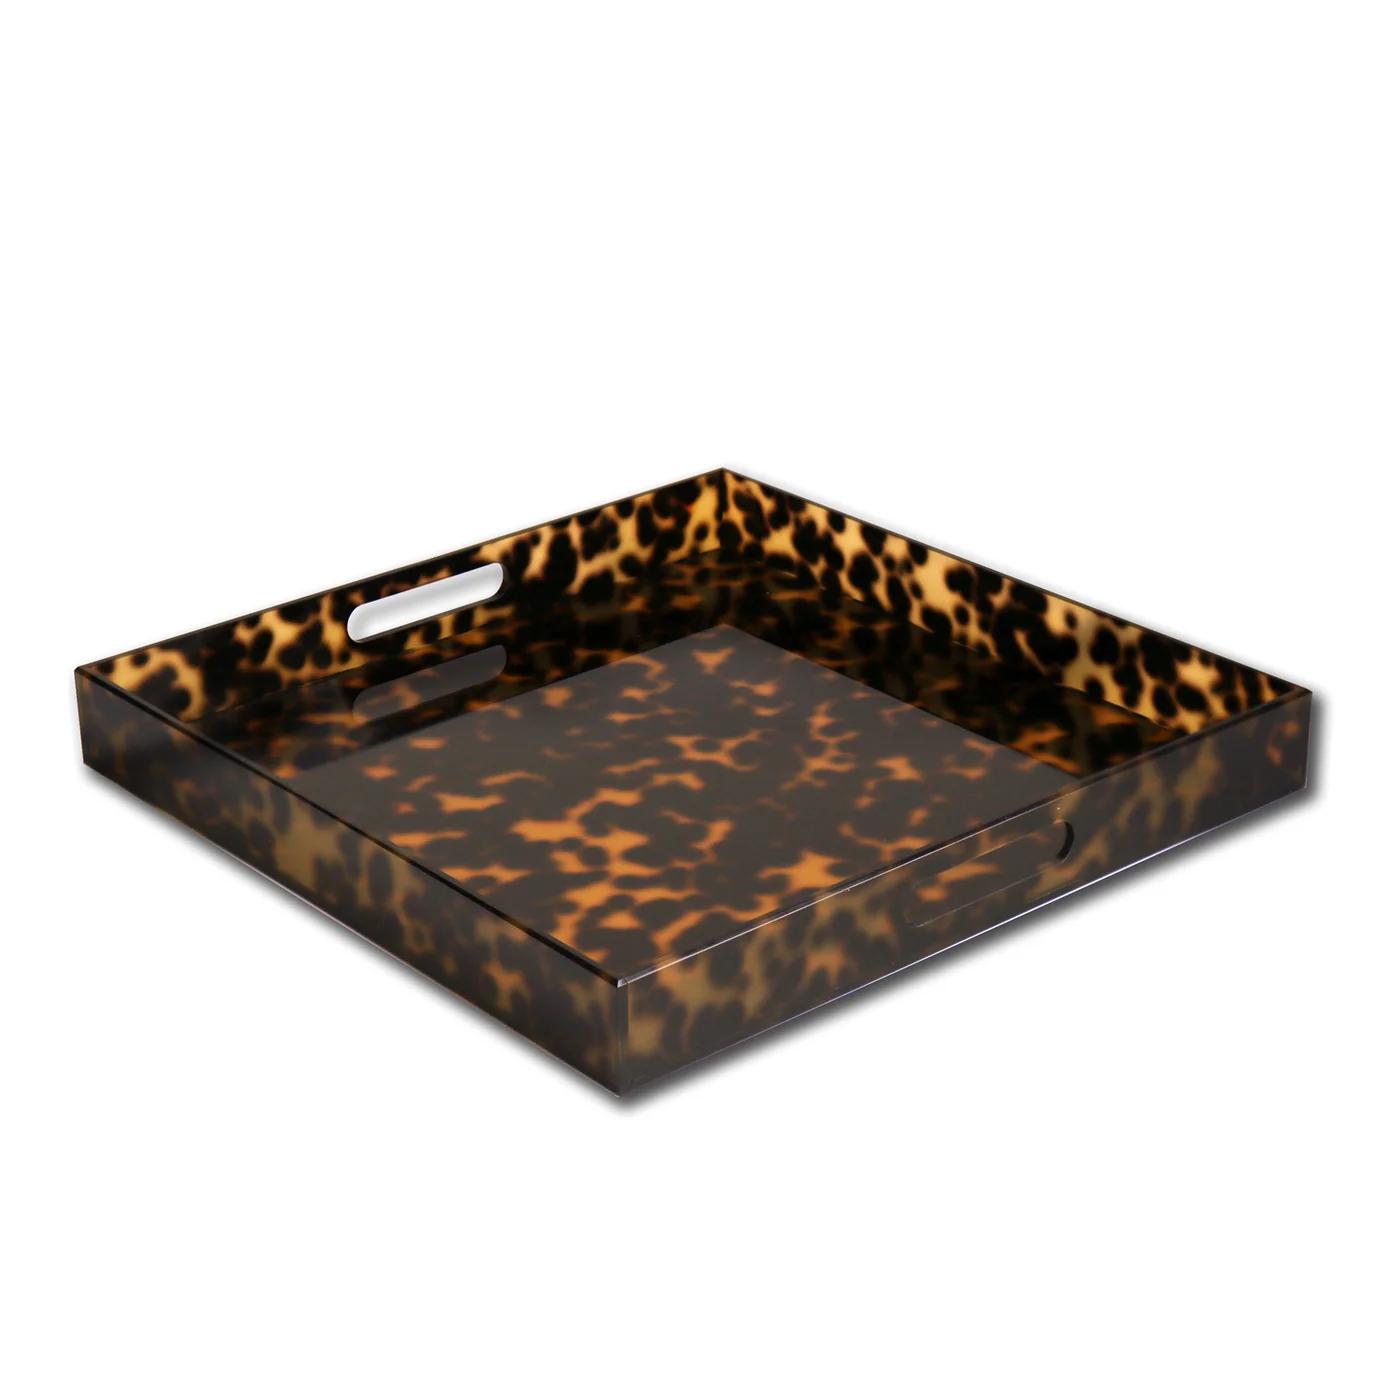 Beatriz Ball VIDA Acrylic Tortoise Large Square Tray with Handles-Home/Giftware-Kevin's Fine Outdoor Gear & Apparel